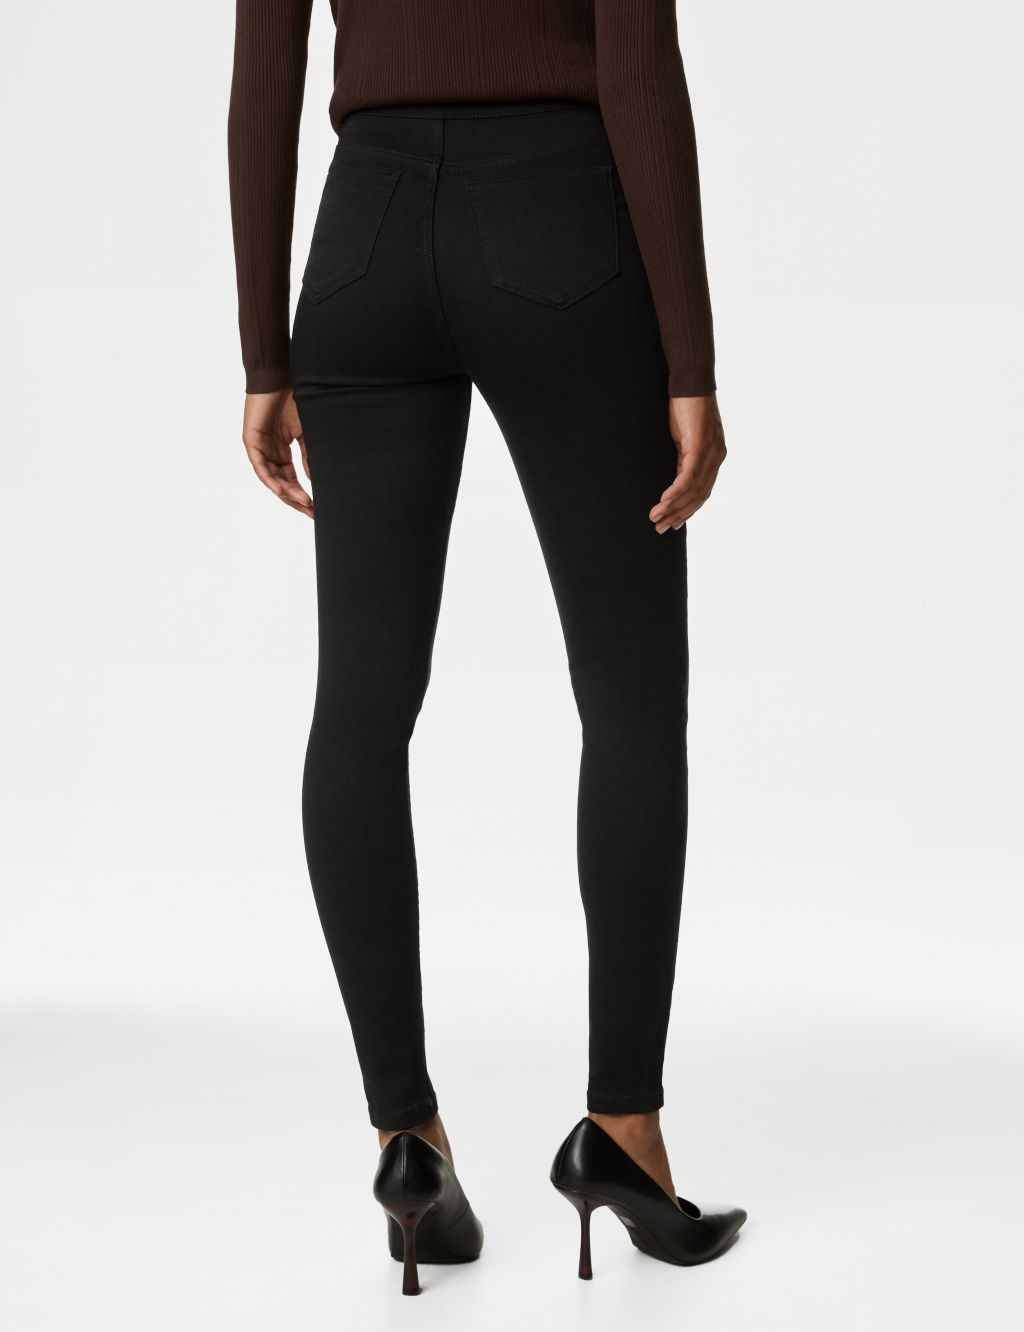 High Waisted Super Skinny Jeans image 5